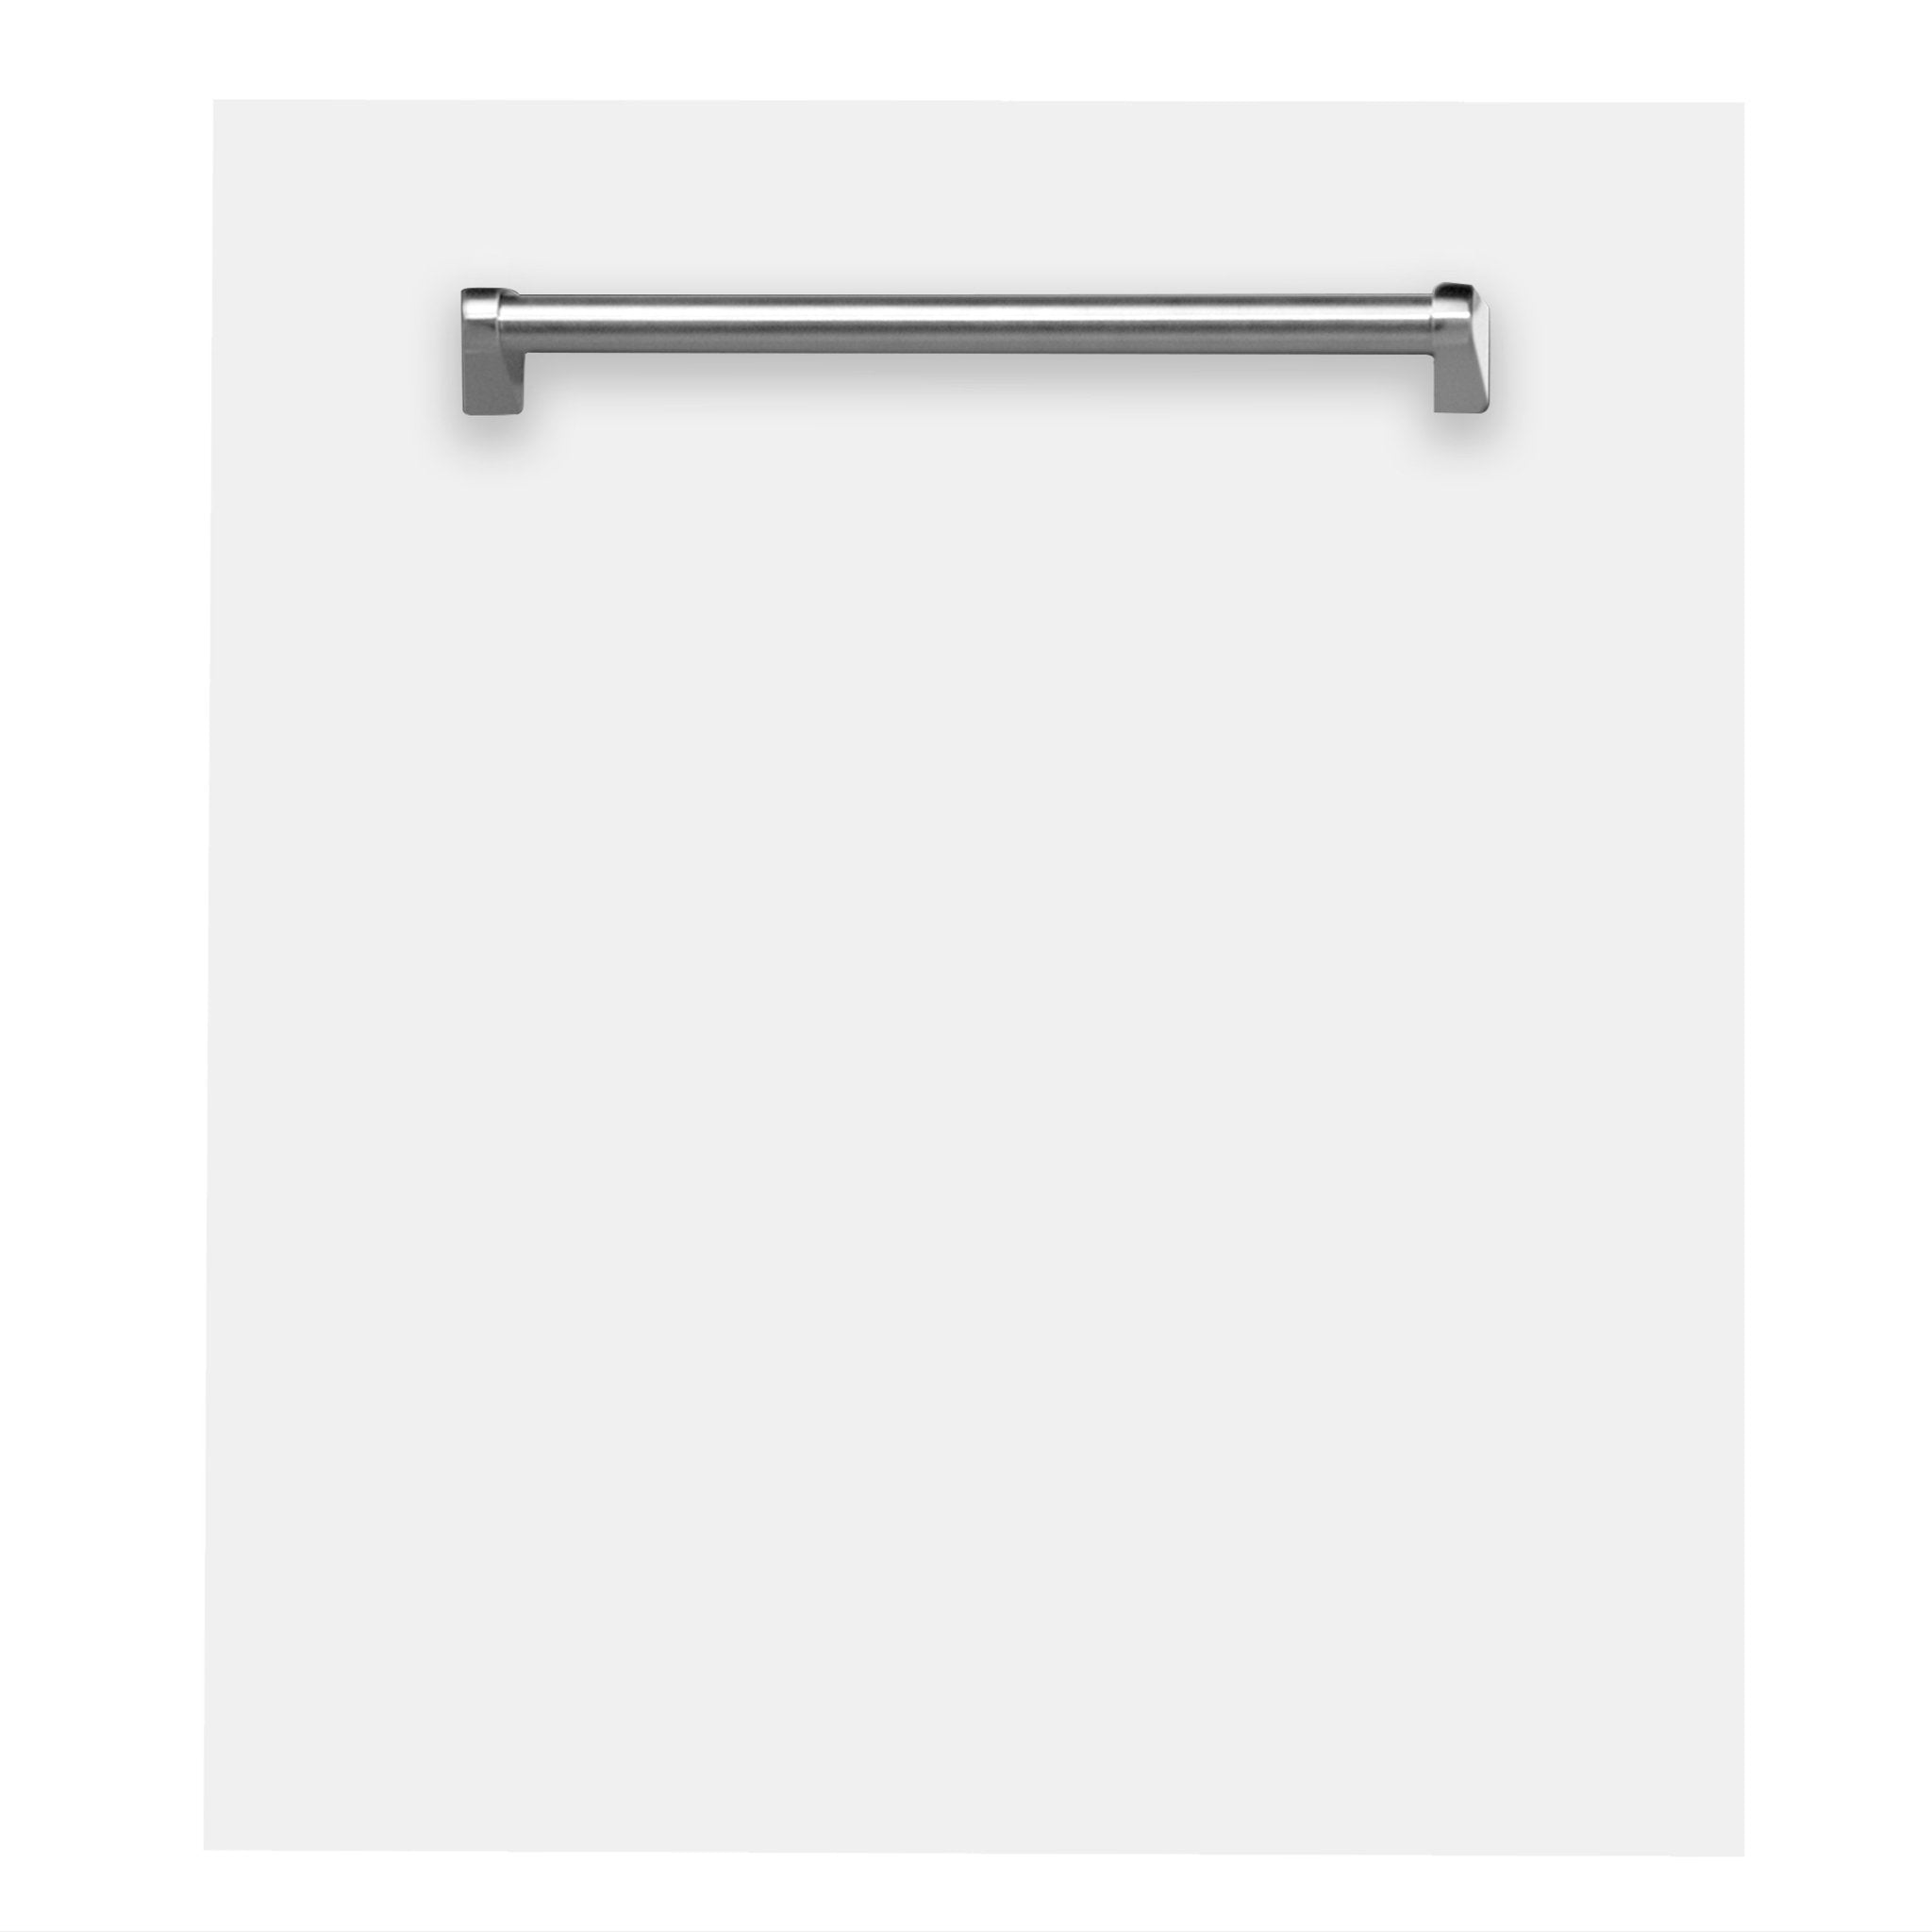 ZLINE 24 in. Panel Ready Top Control Dishwasher with Stainless Steel Tub, 40dBa